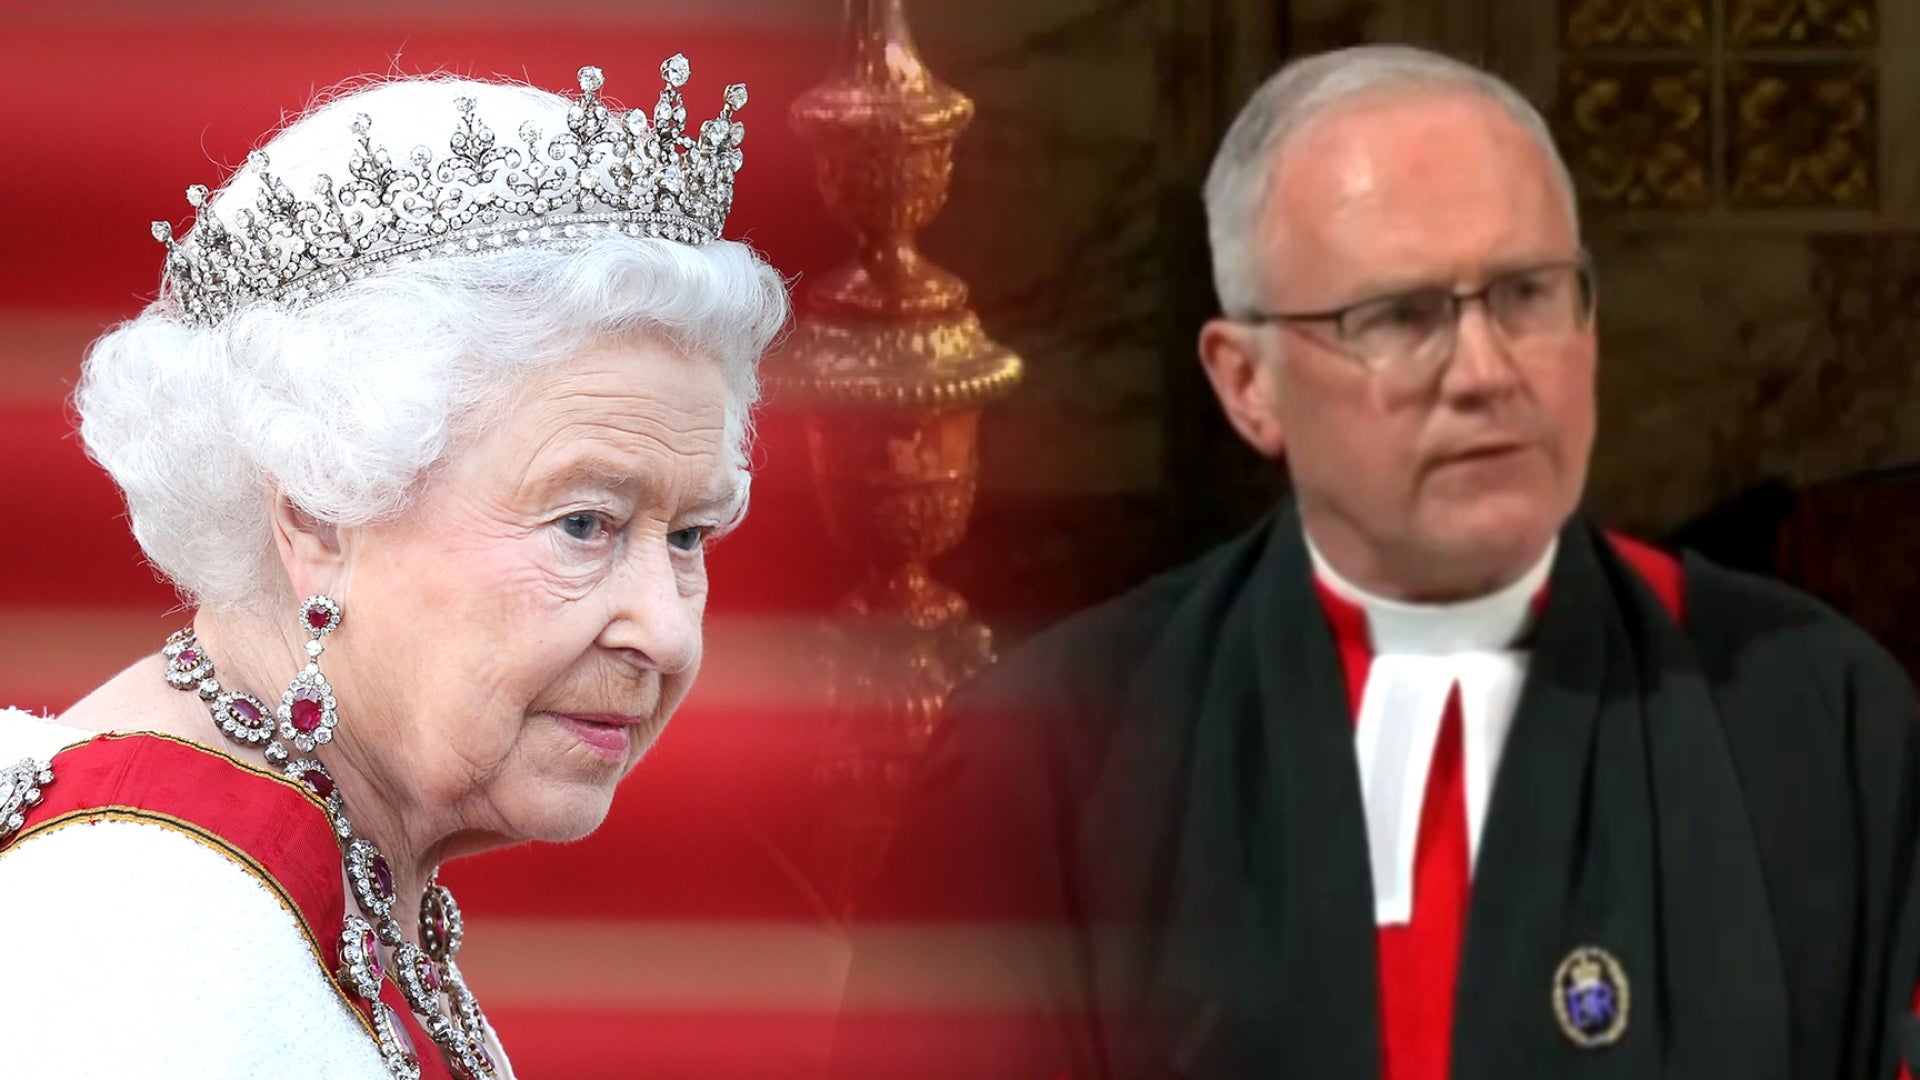 Queen Elizabeth's Funeral: Phone Seemingly Interrupts Reading at Committal Service